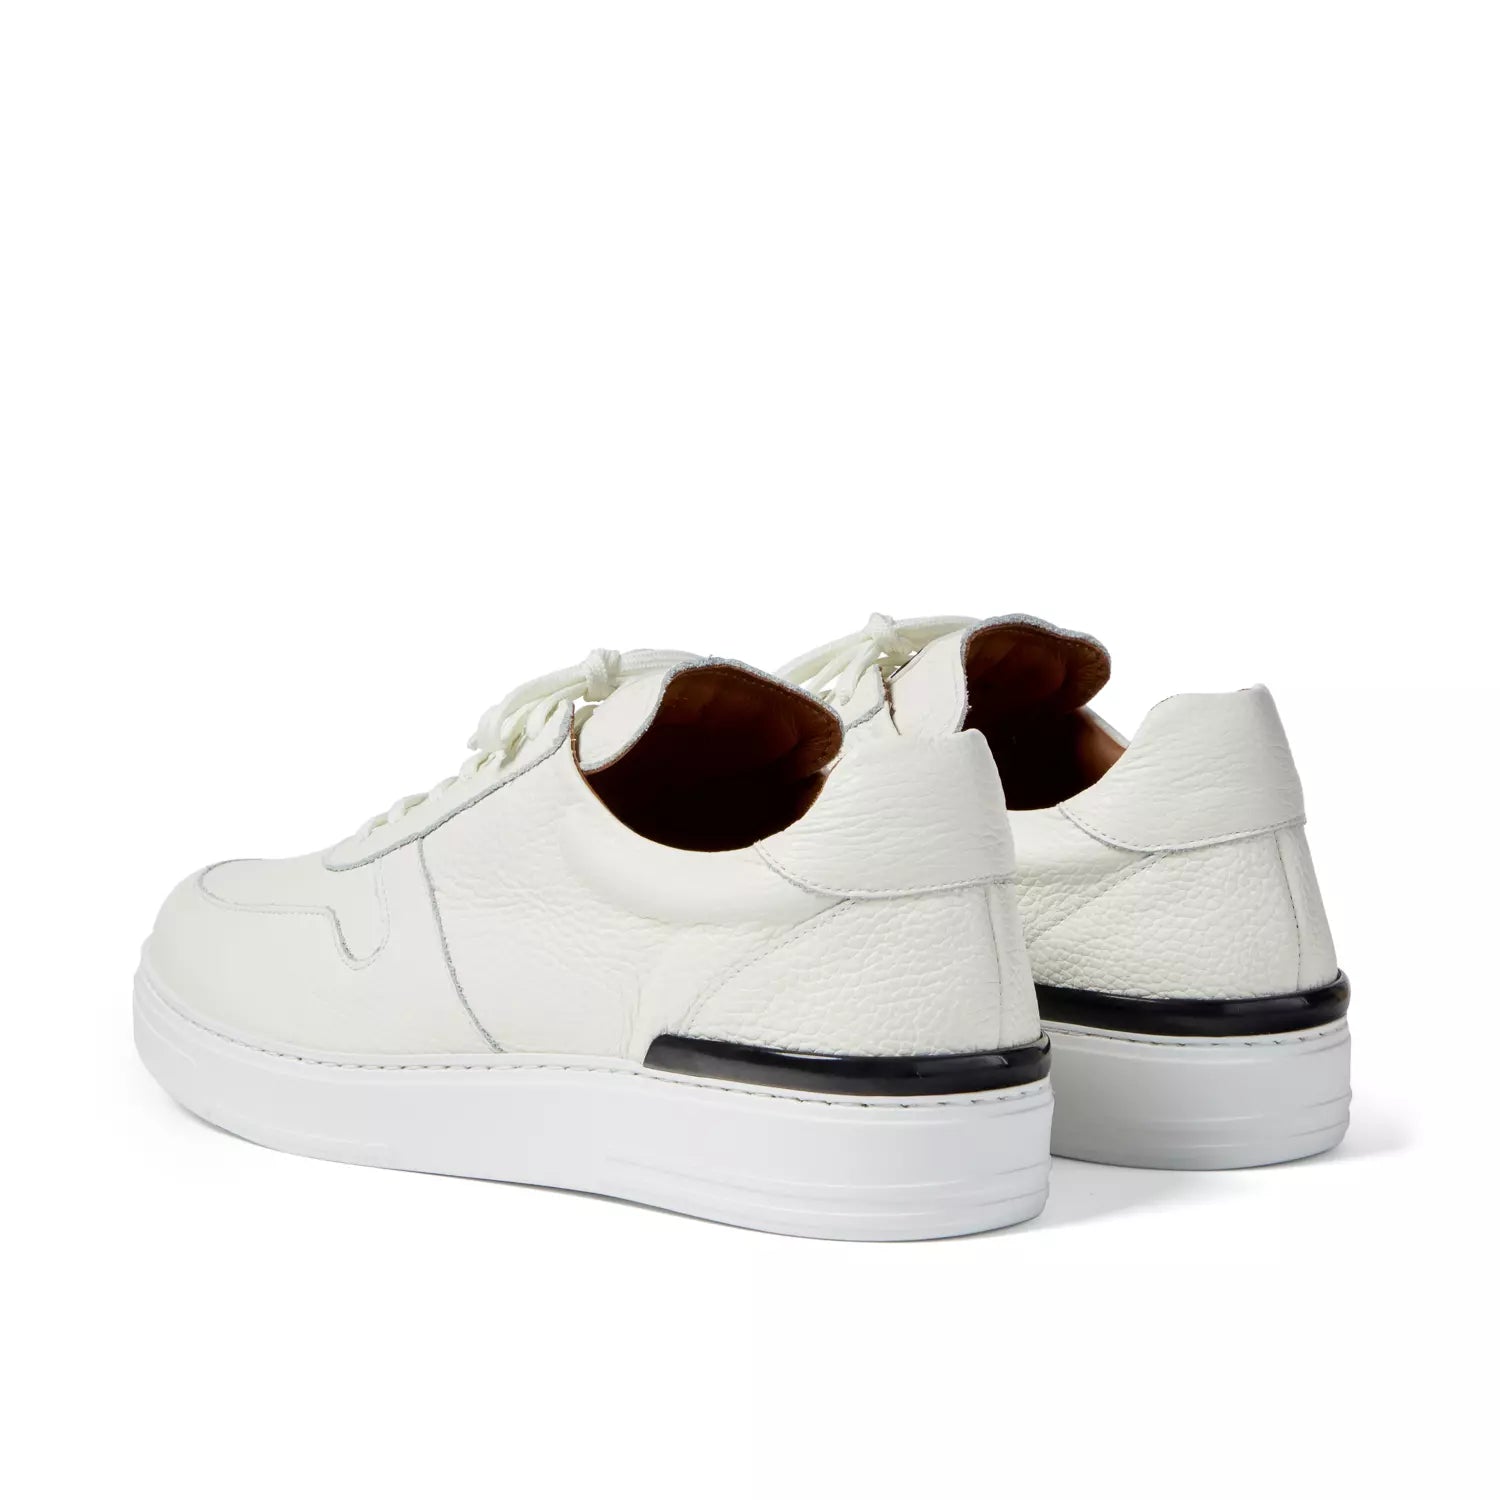 Duke and Dexter Ritchie White leather sneakers for men back view